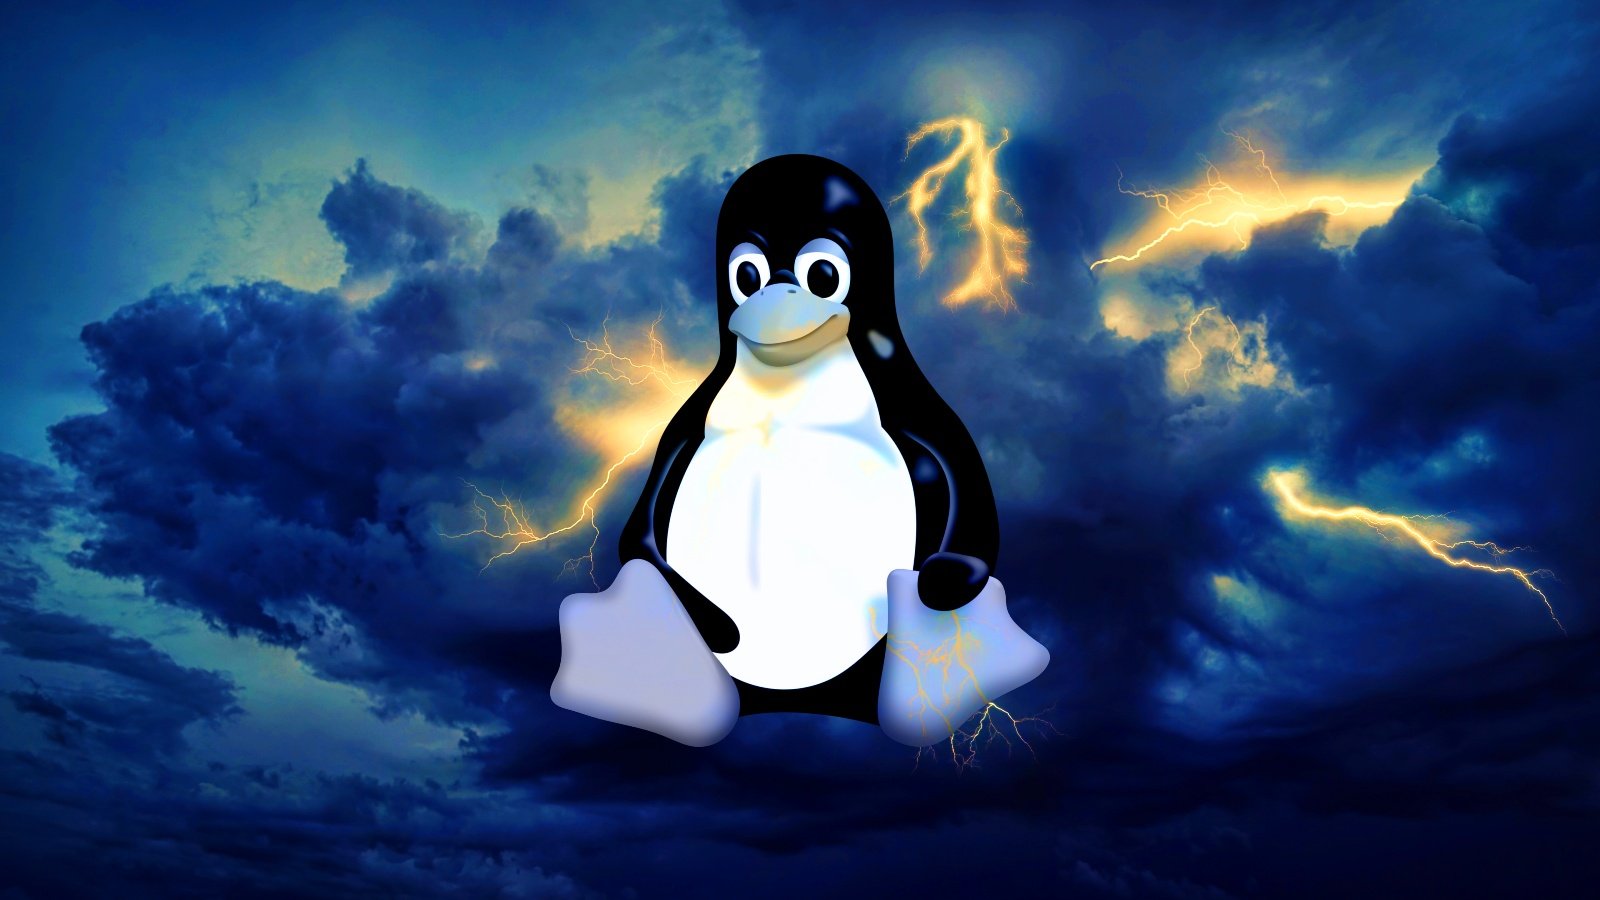 New Linux malware evades detection using multi-stage deployment